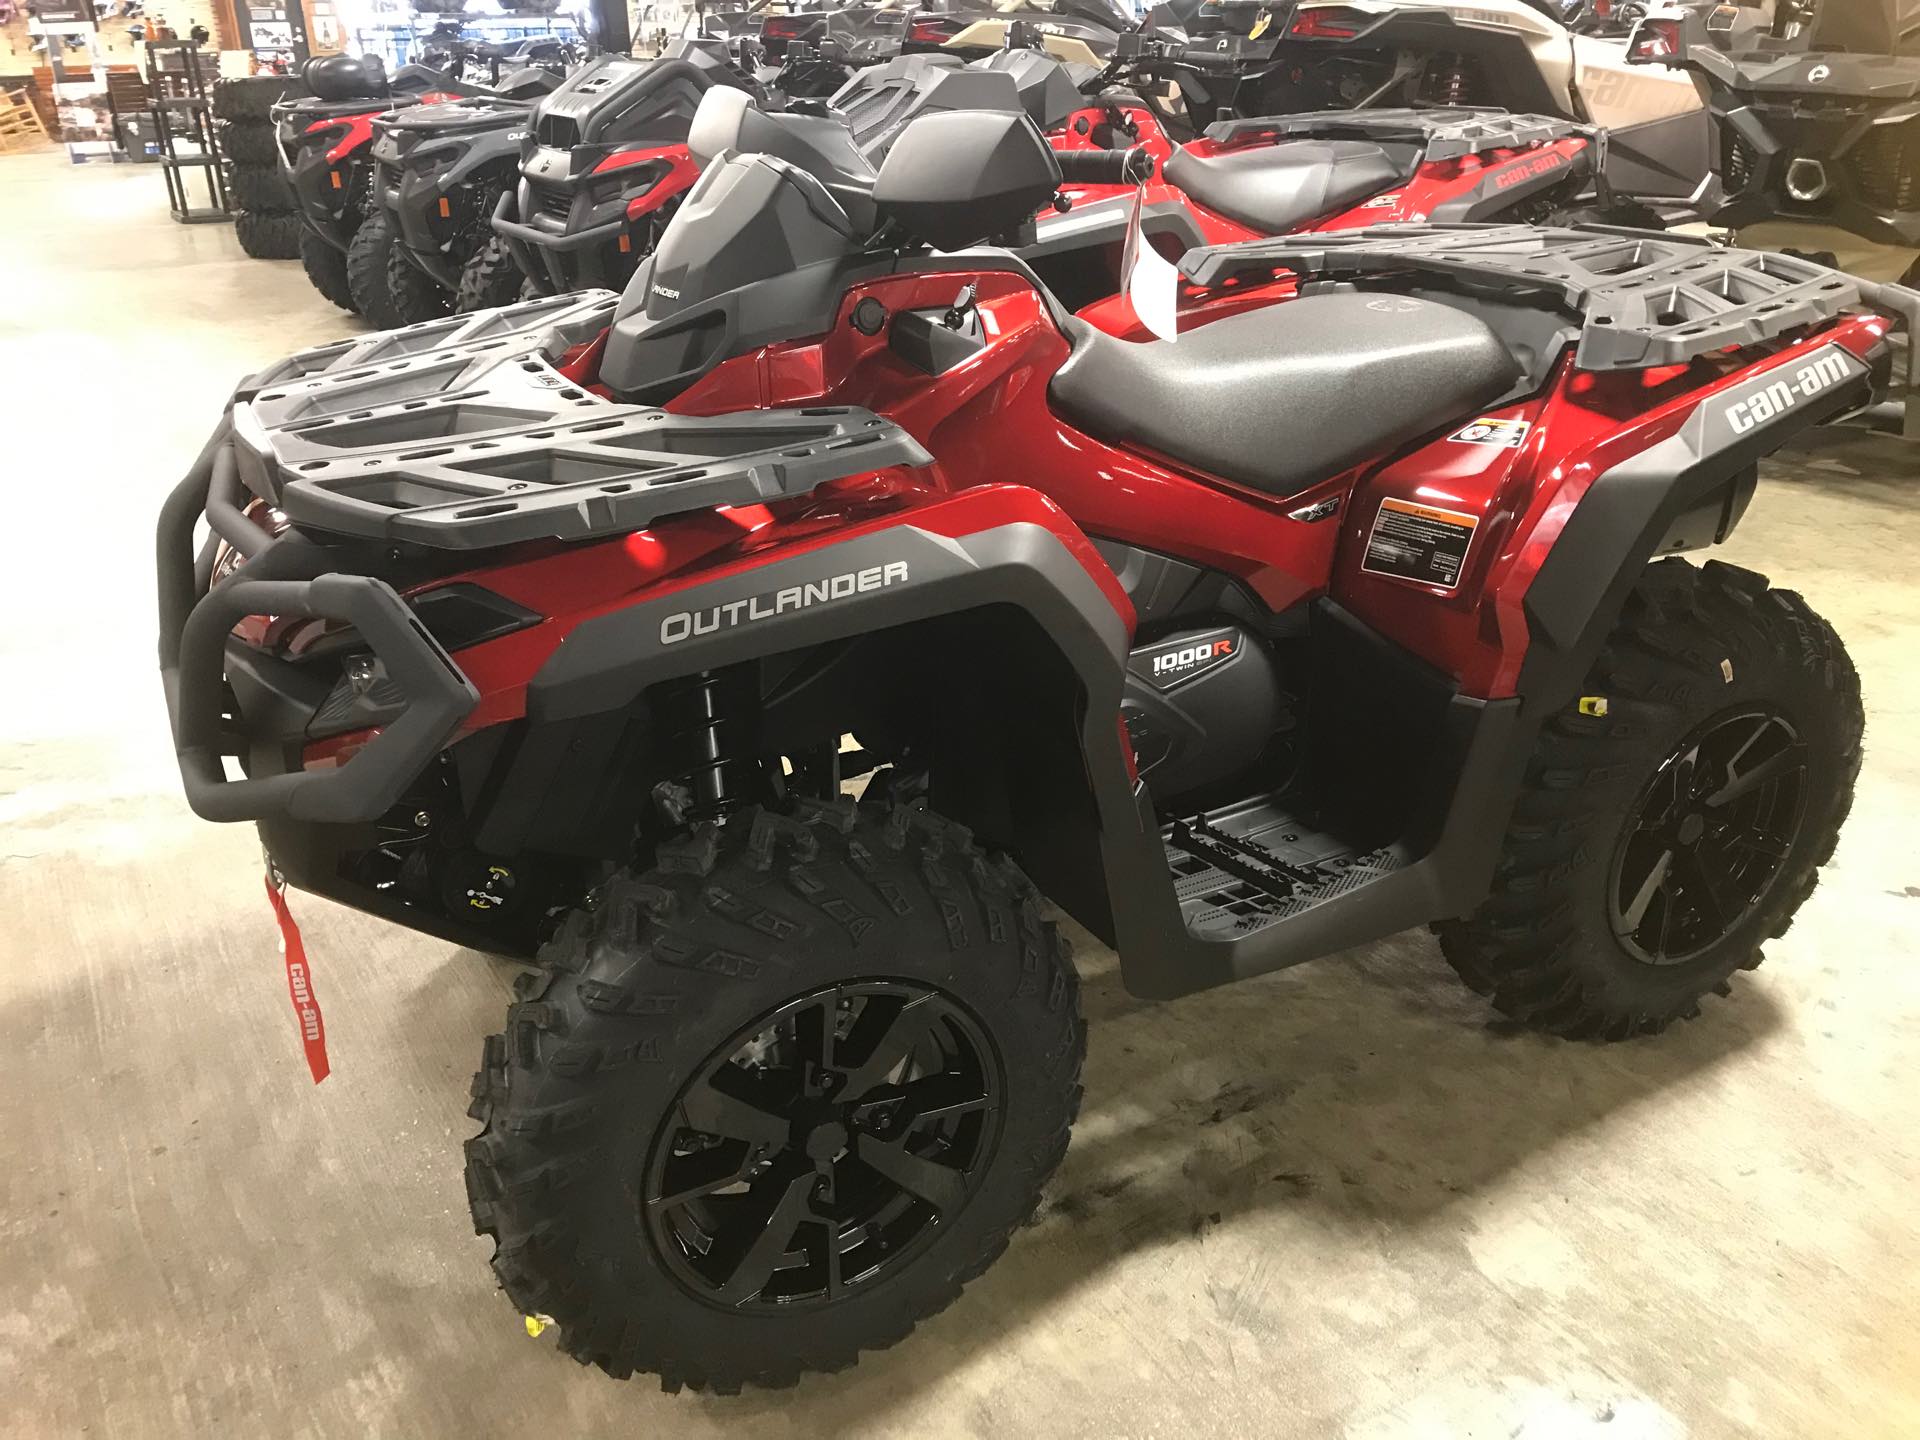 Our CAN-AM 1000R Inventory